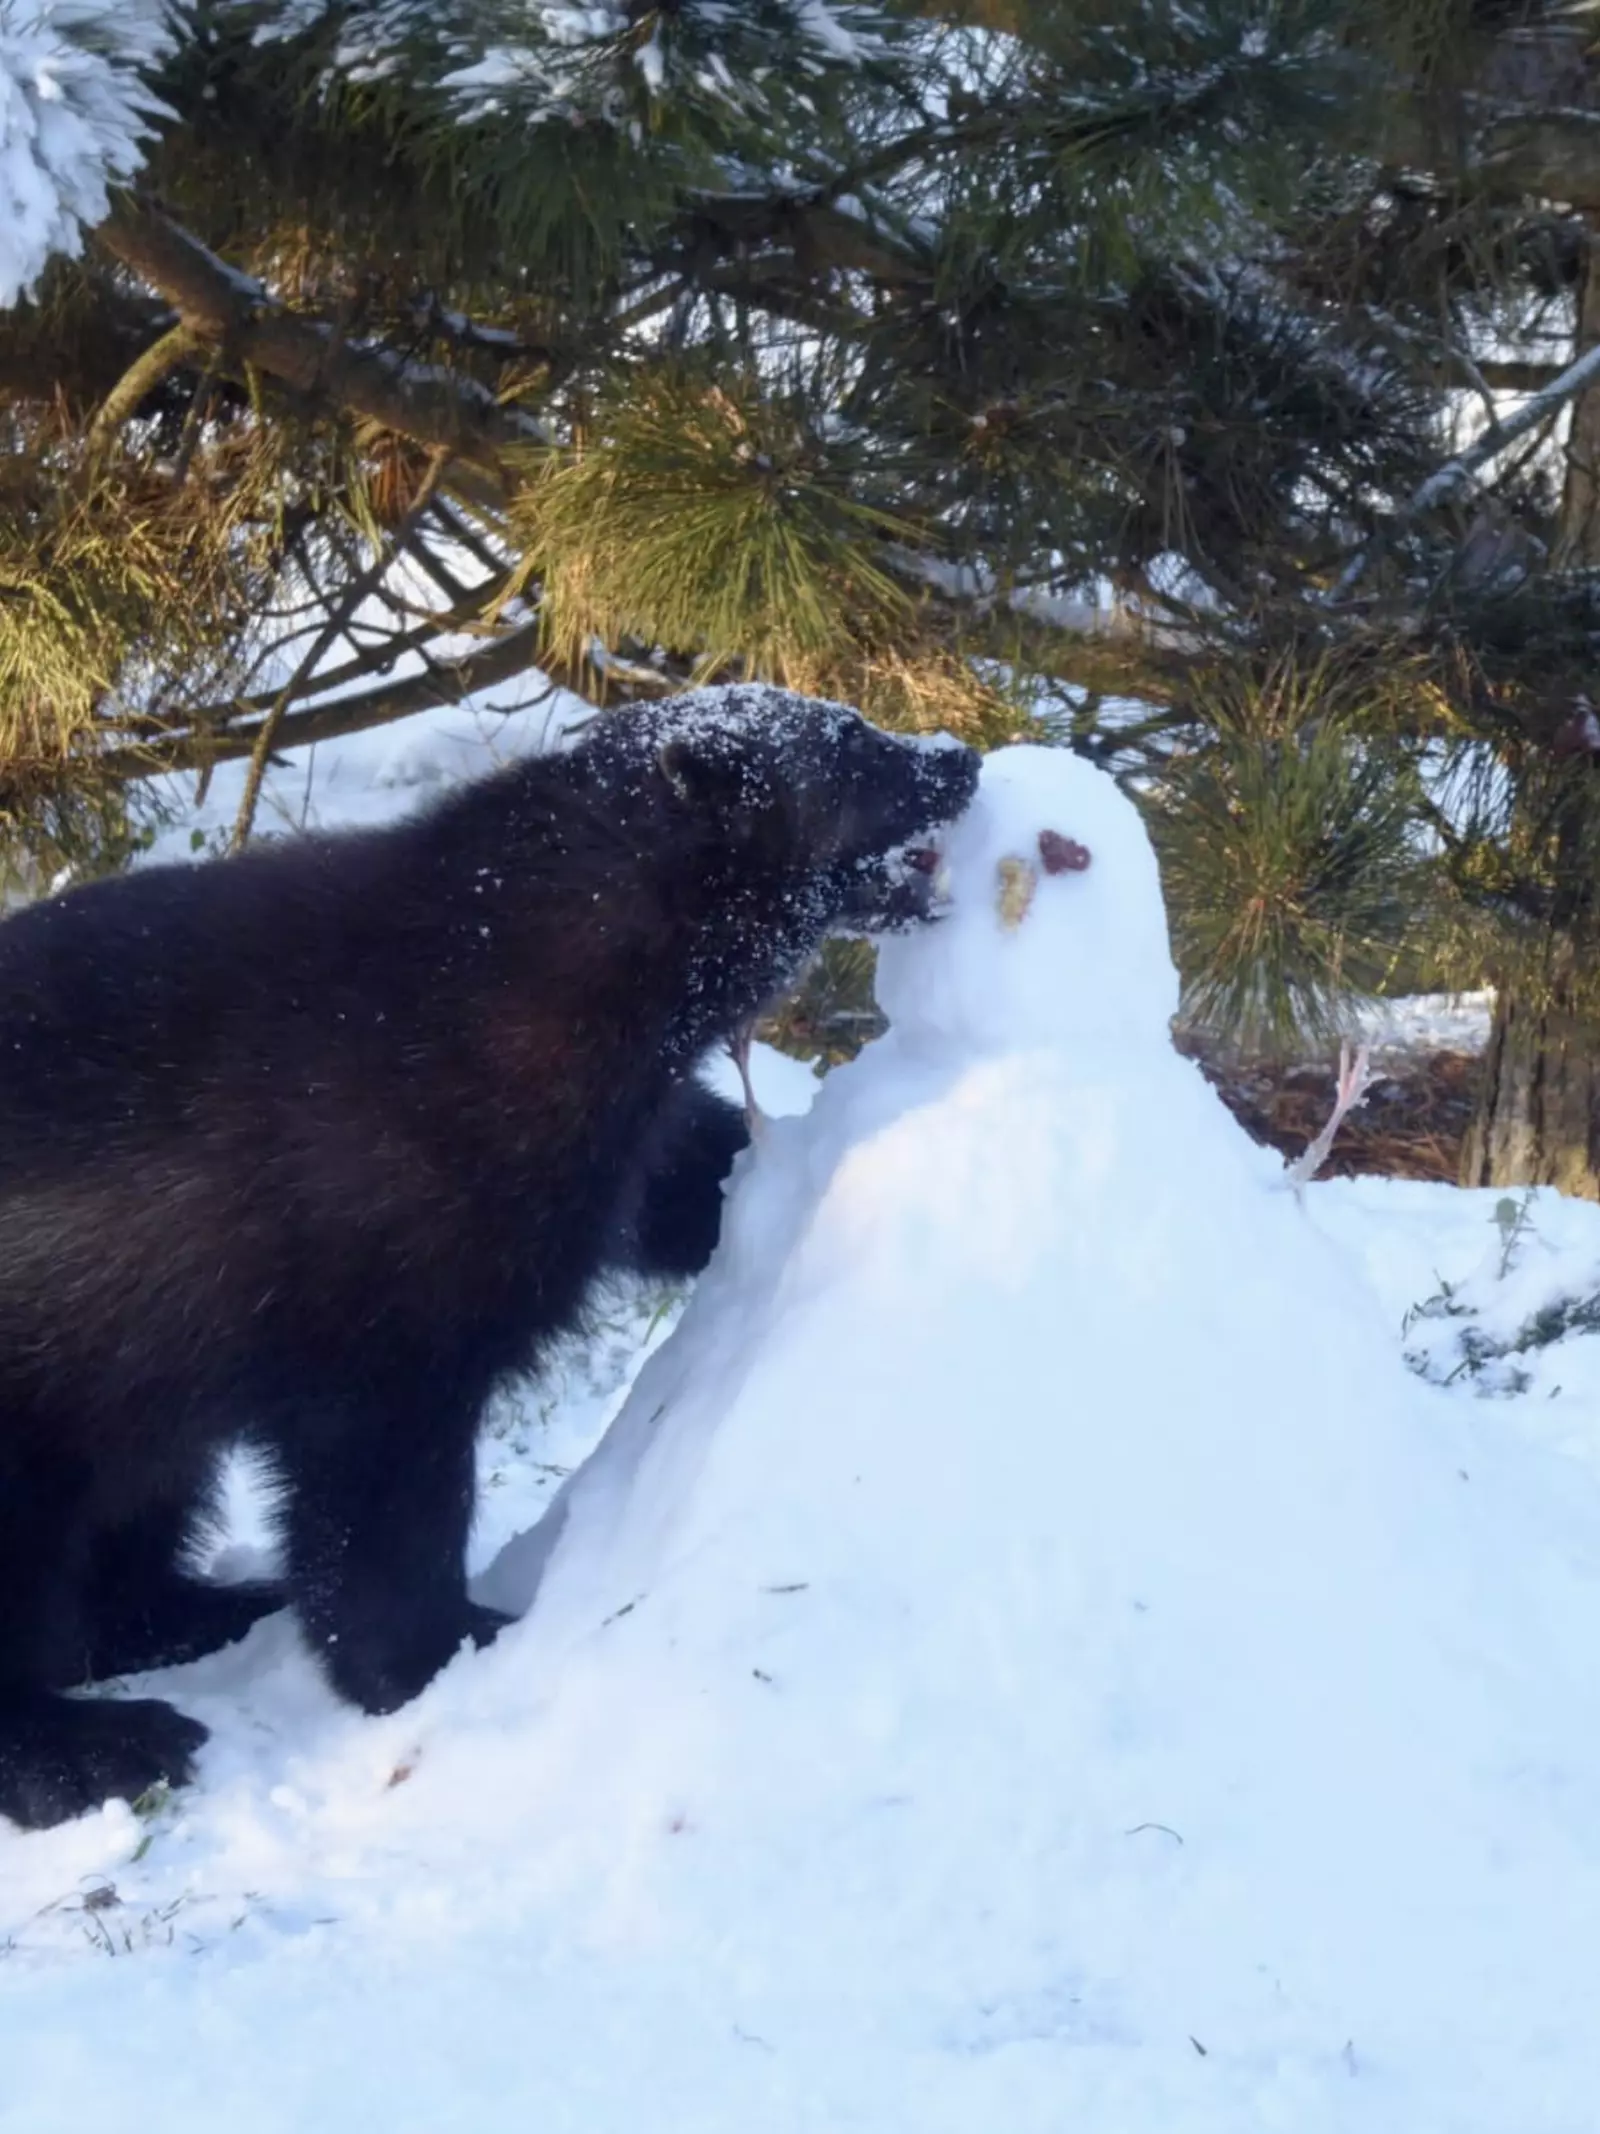 A wolverine explores a snowman at Whipsnade Zoo